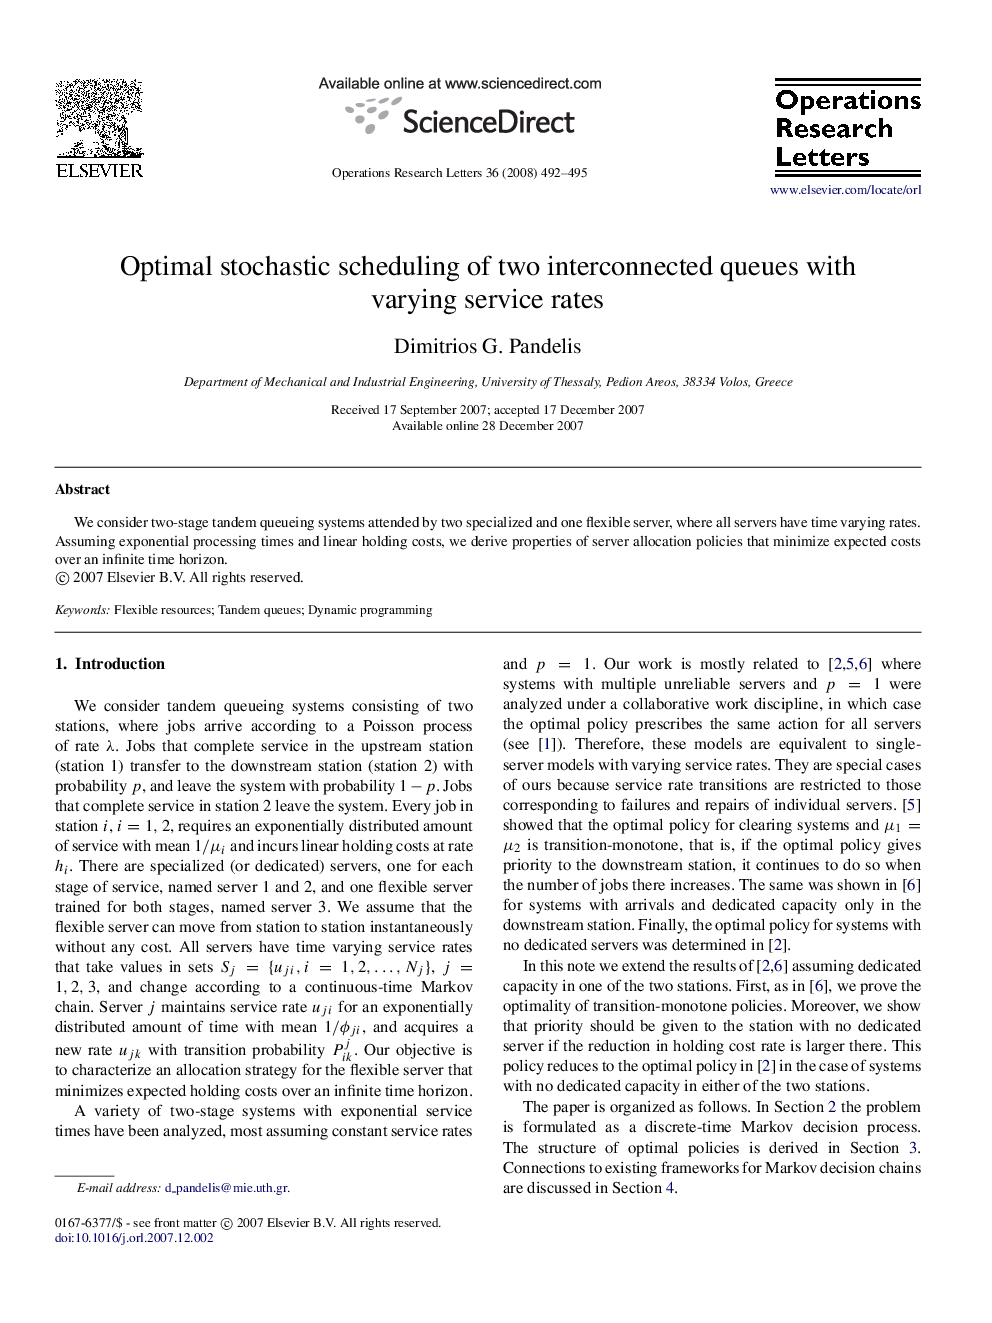 Optimal stochastic scheduling of two interconnected queues with varying service rates